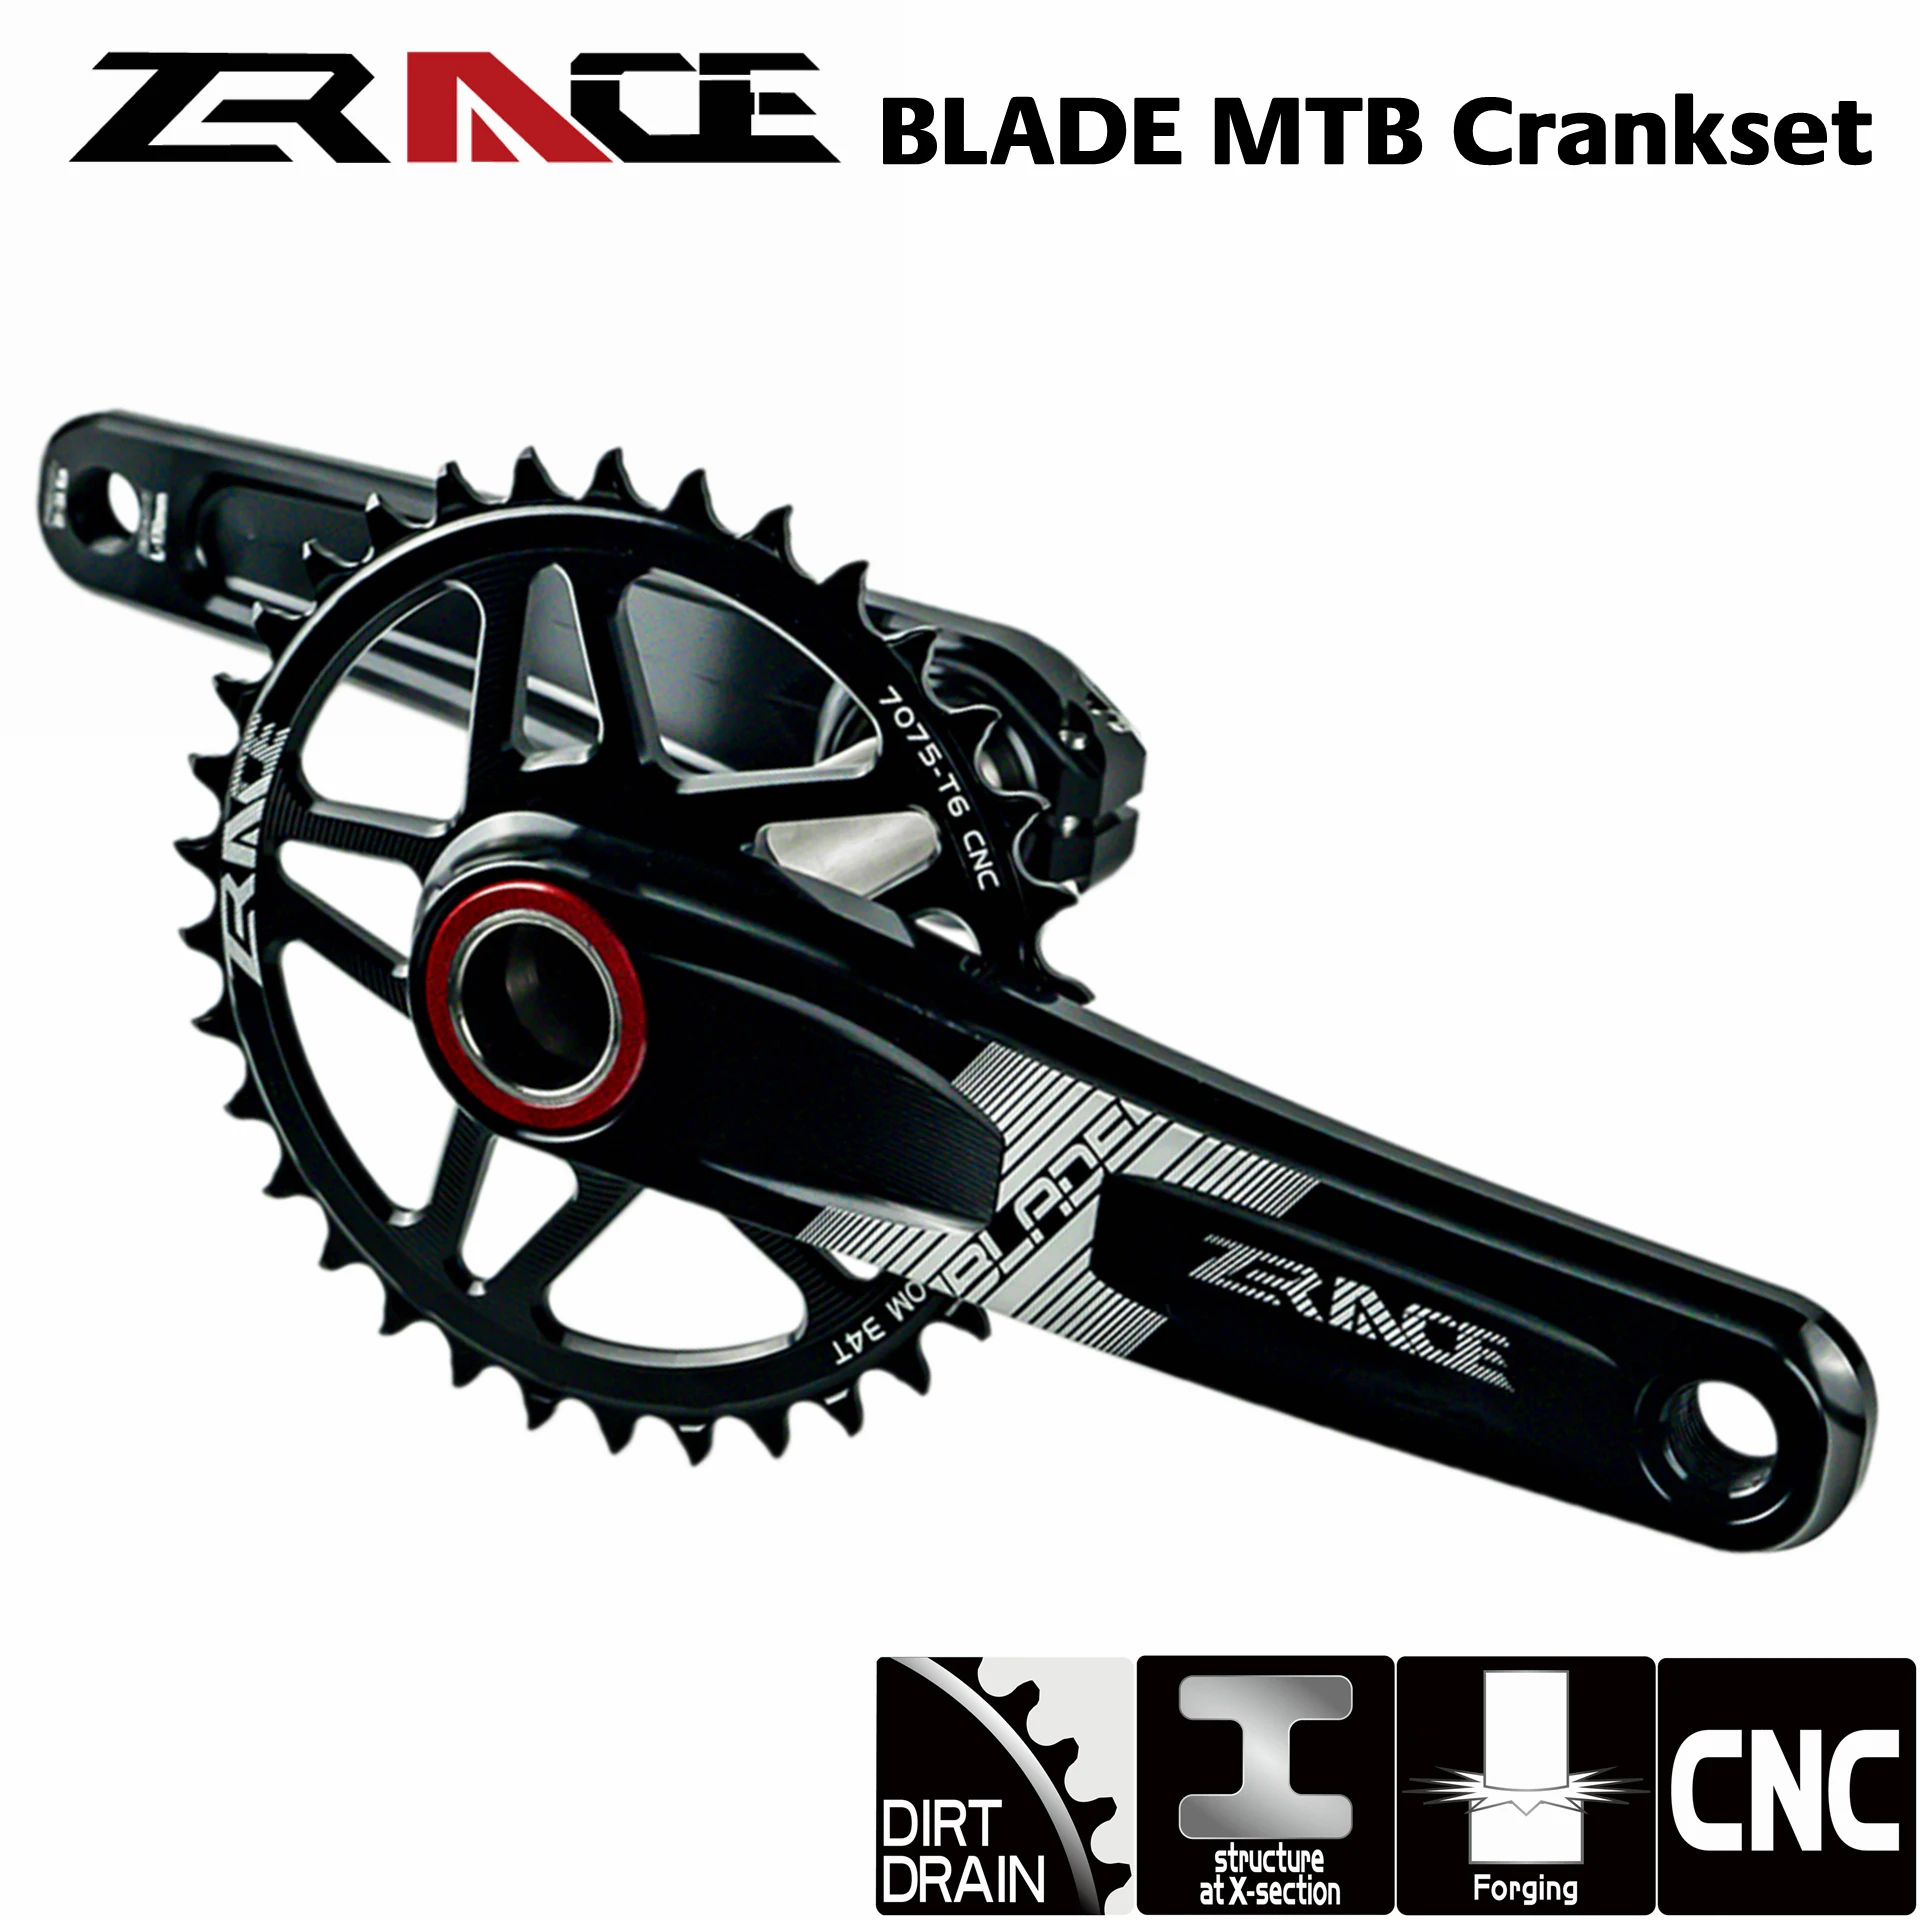 ZRACE BLADE 1 x 10 11 12 Speed Crankset Eagle Tooth for MTB XC / TR / AM 170 / 175mm,32T/34T/36T,BB68/73 Chainset